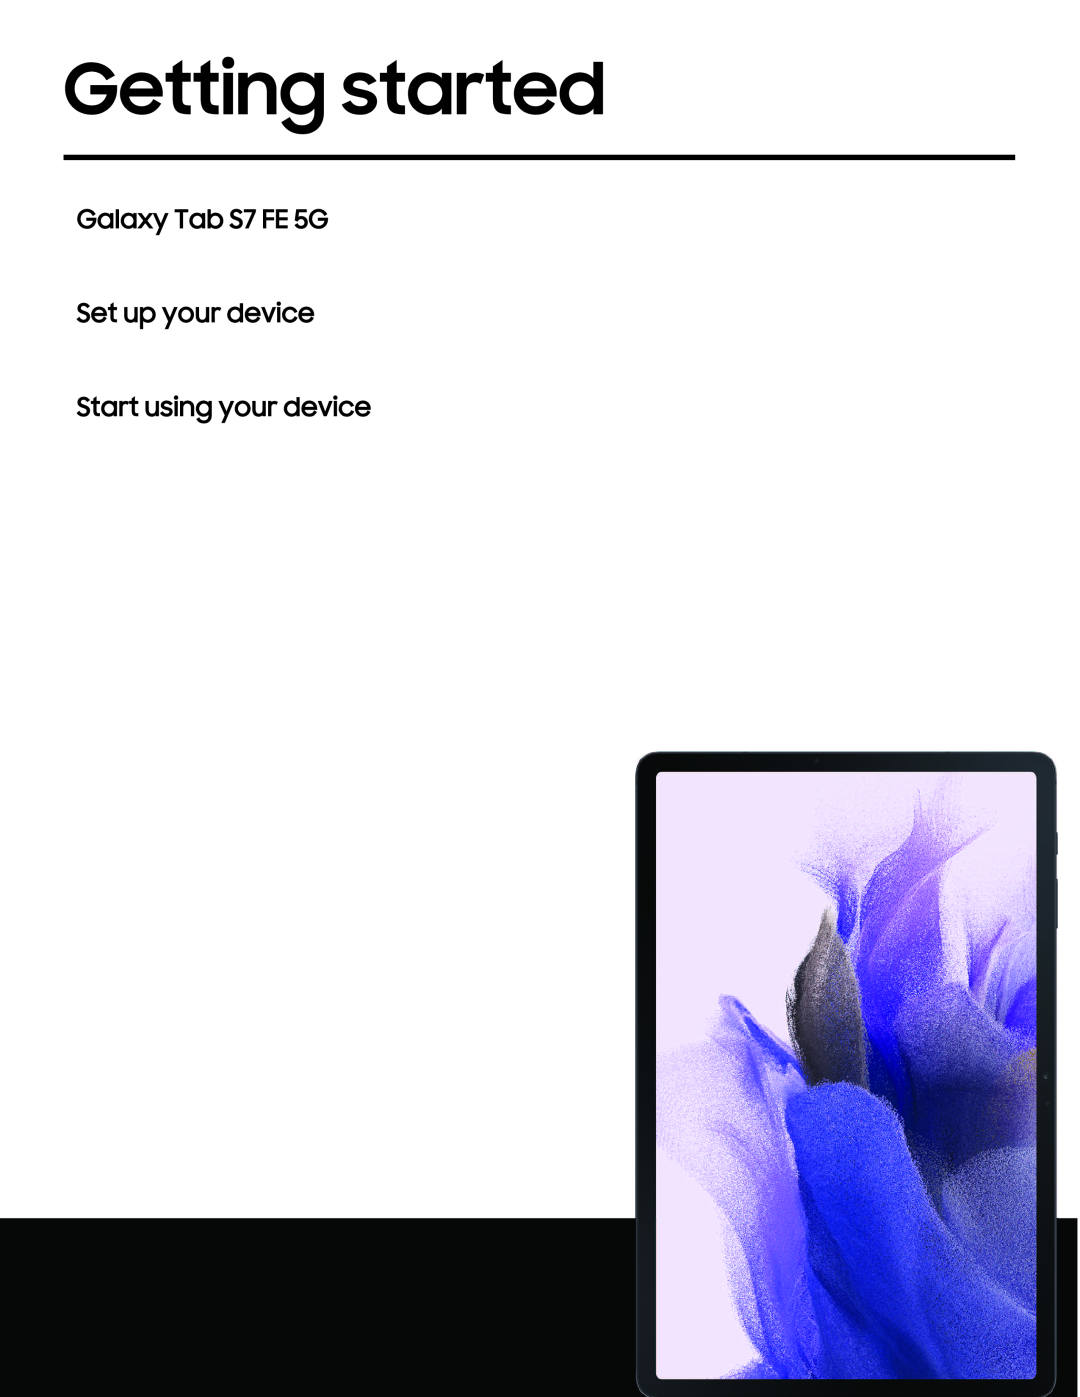 Getting started Galaxy Tab S7 FE AT&T